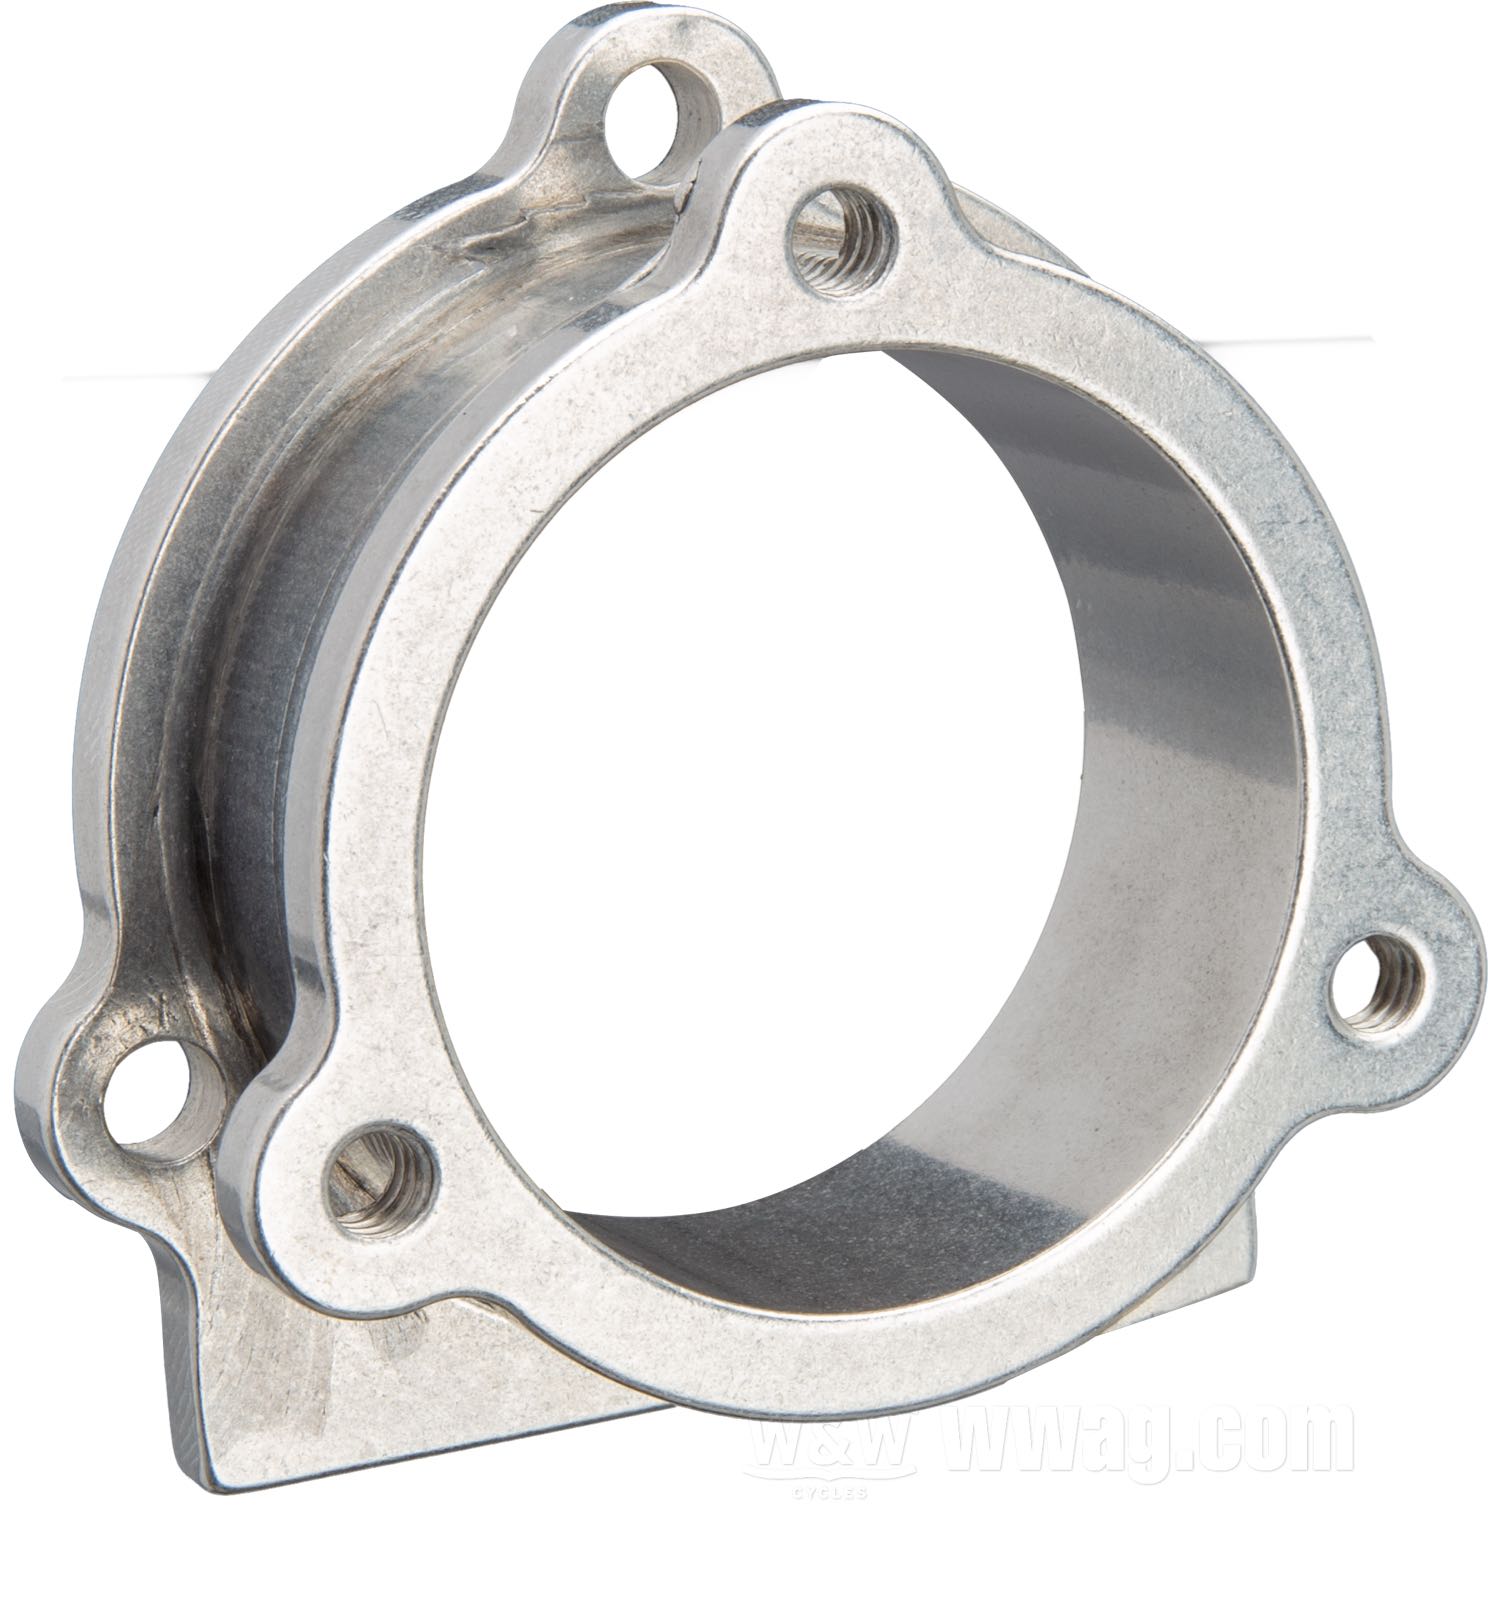 Air cleaner support bracket is for S&S Super "E" and "G" carburetors